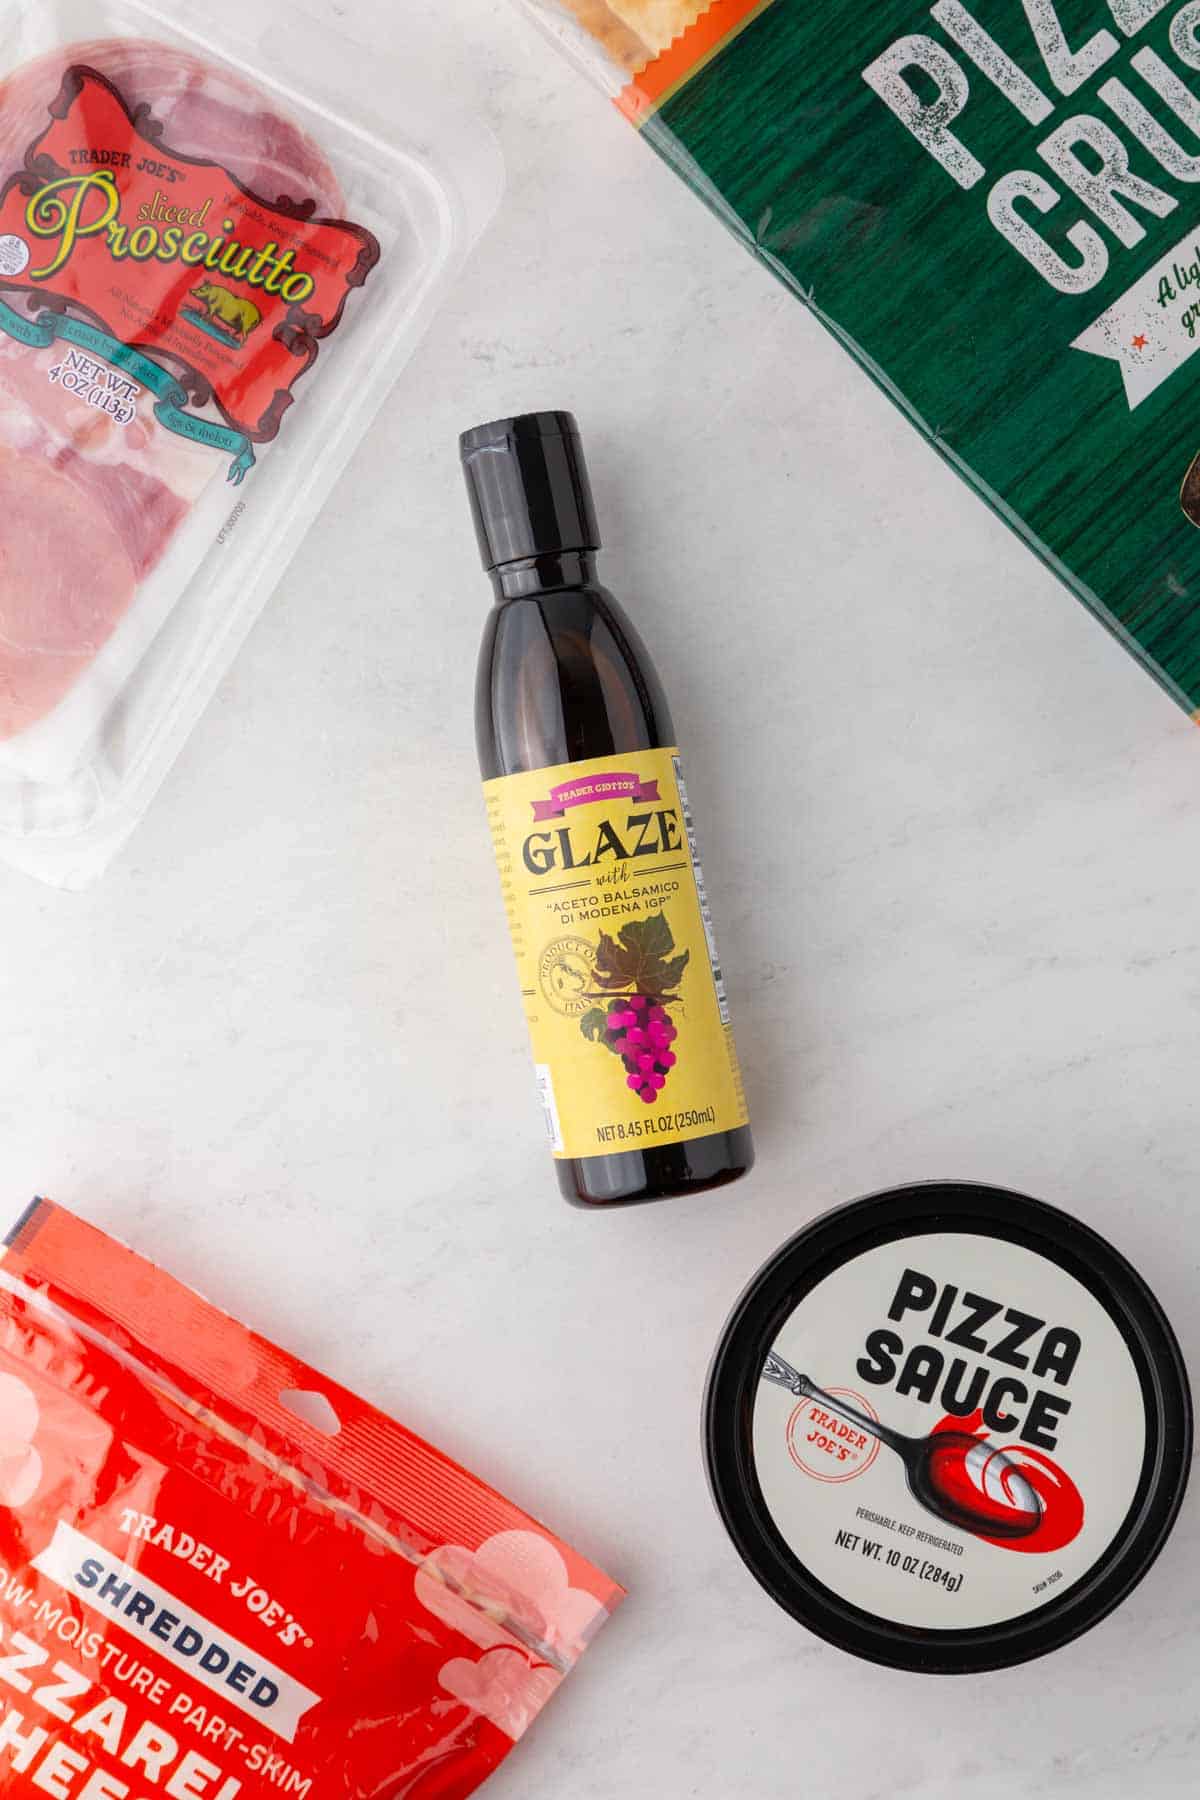 Trader Joe's balsamic glaze and other ingredients needed for Trader Joe's pizza on the counter.